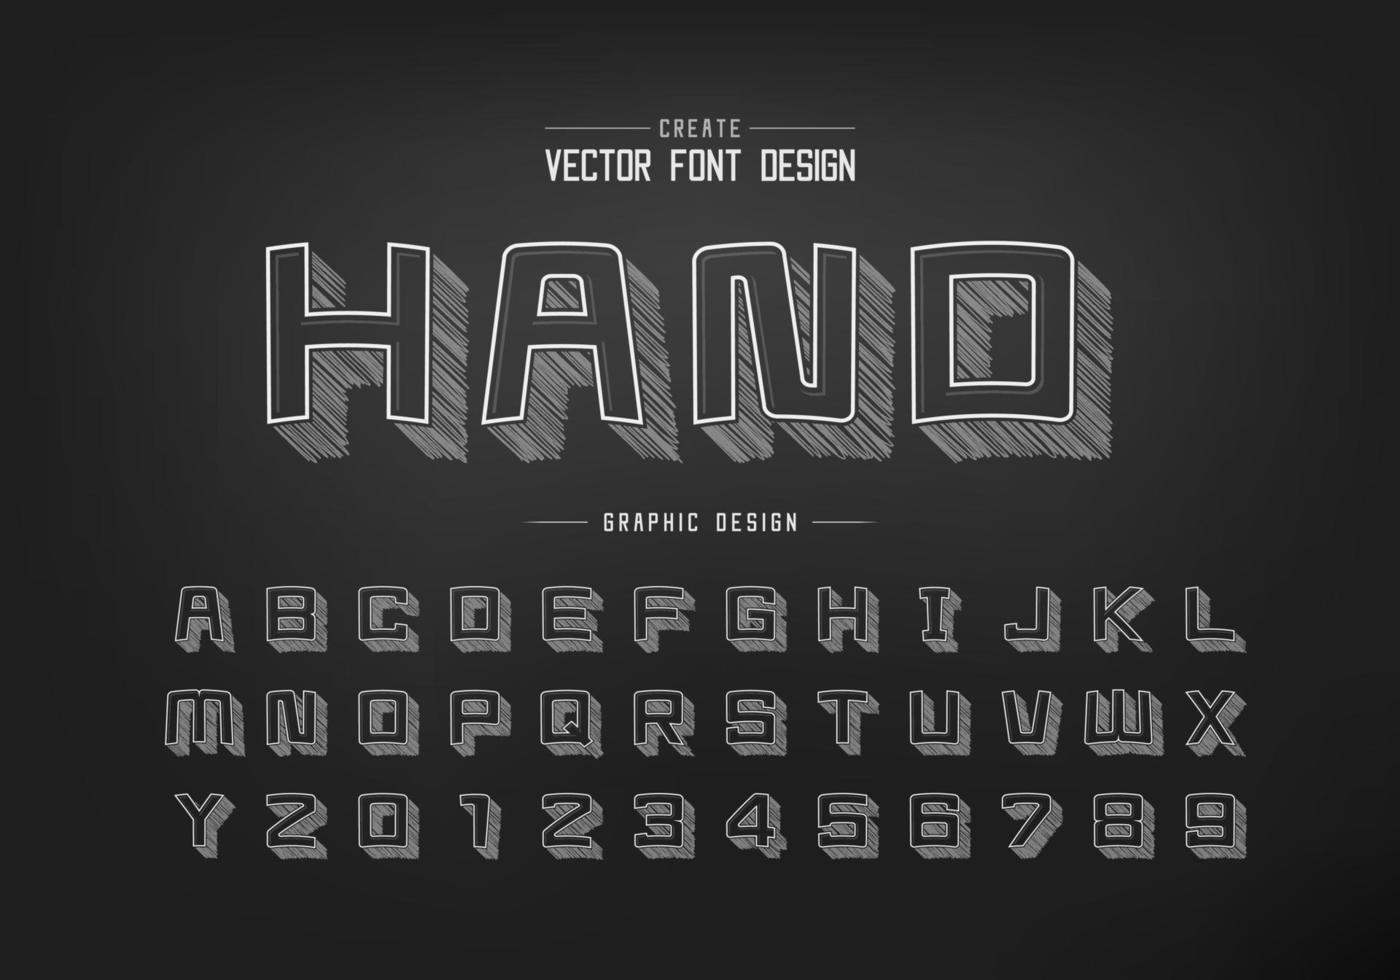 Pencil sketch shadow cartoon font and alphabet vector, Chalk square typeface letter and number design vector